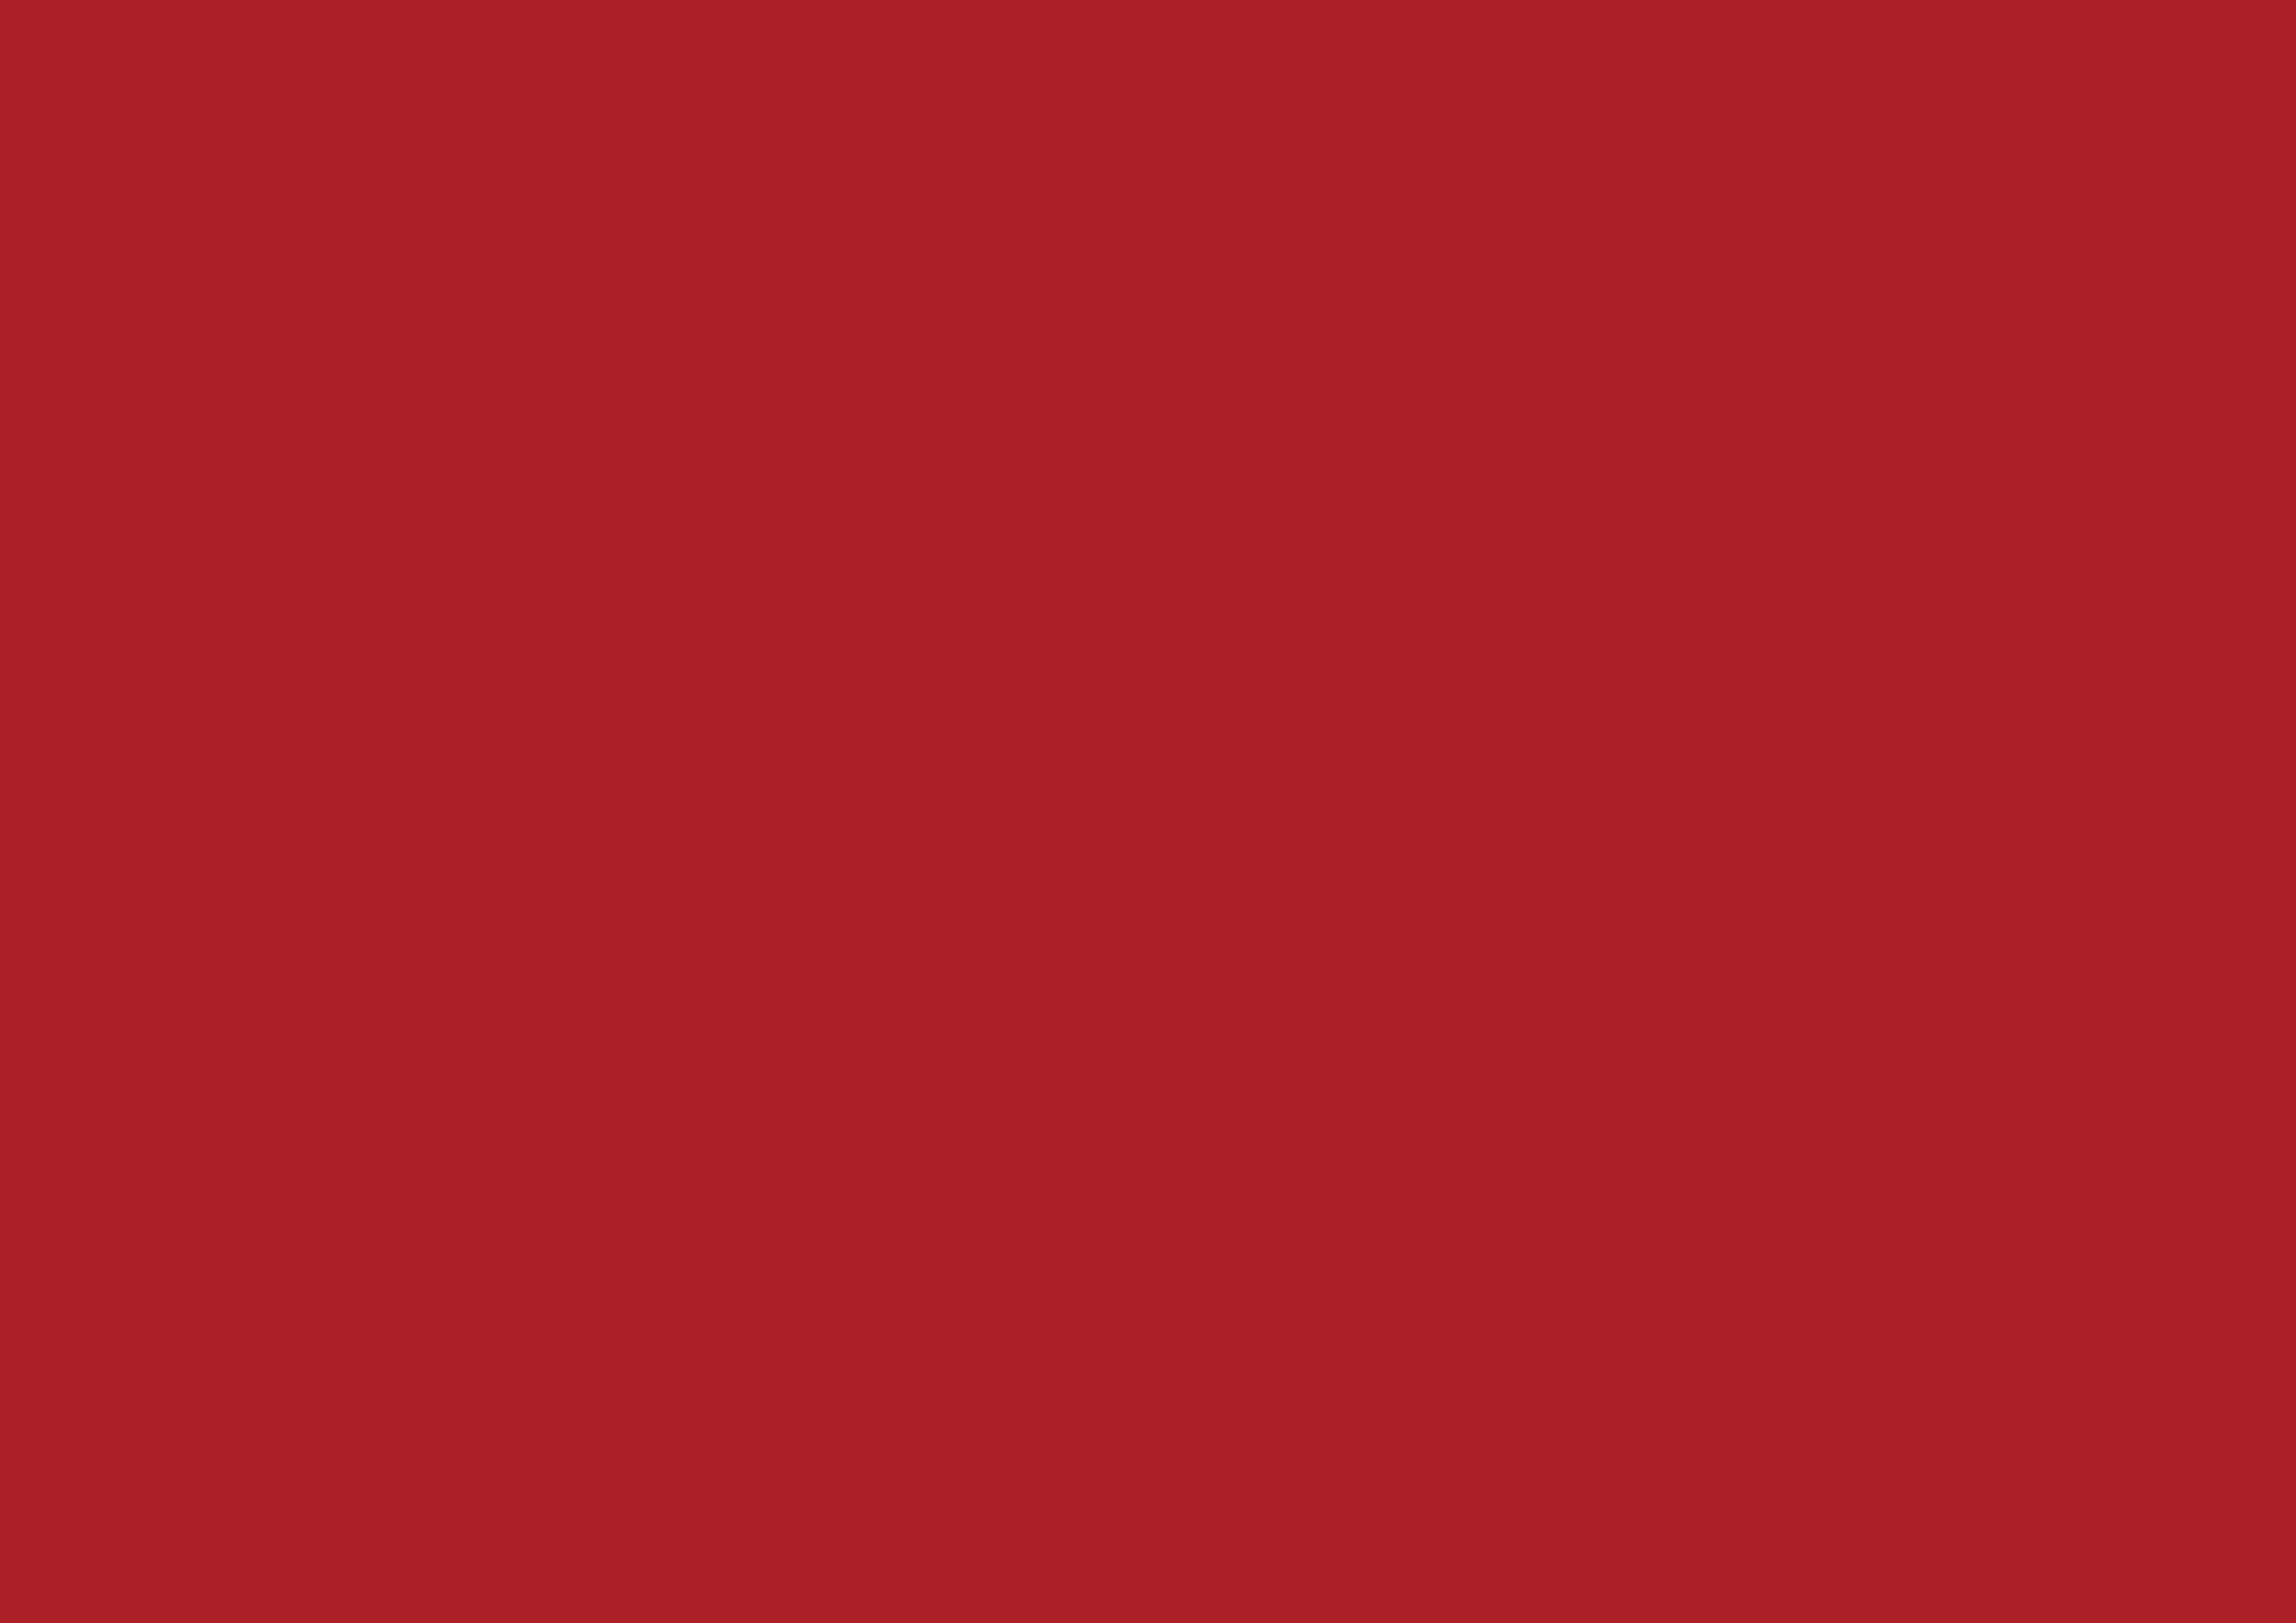 3508x2480 Upsdell Red Solid Color Background